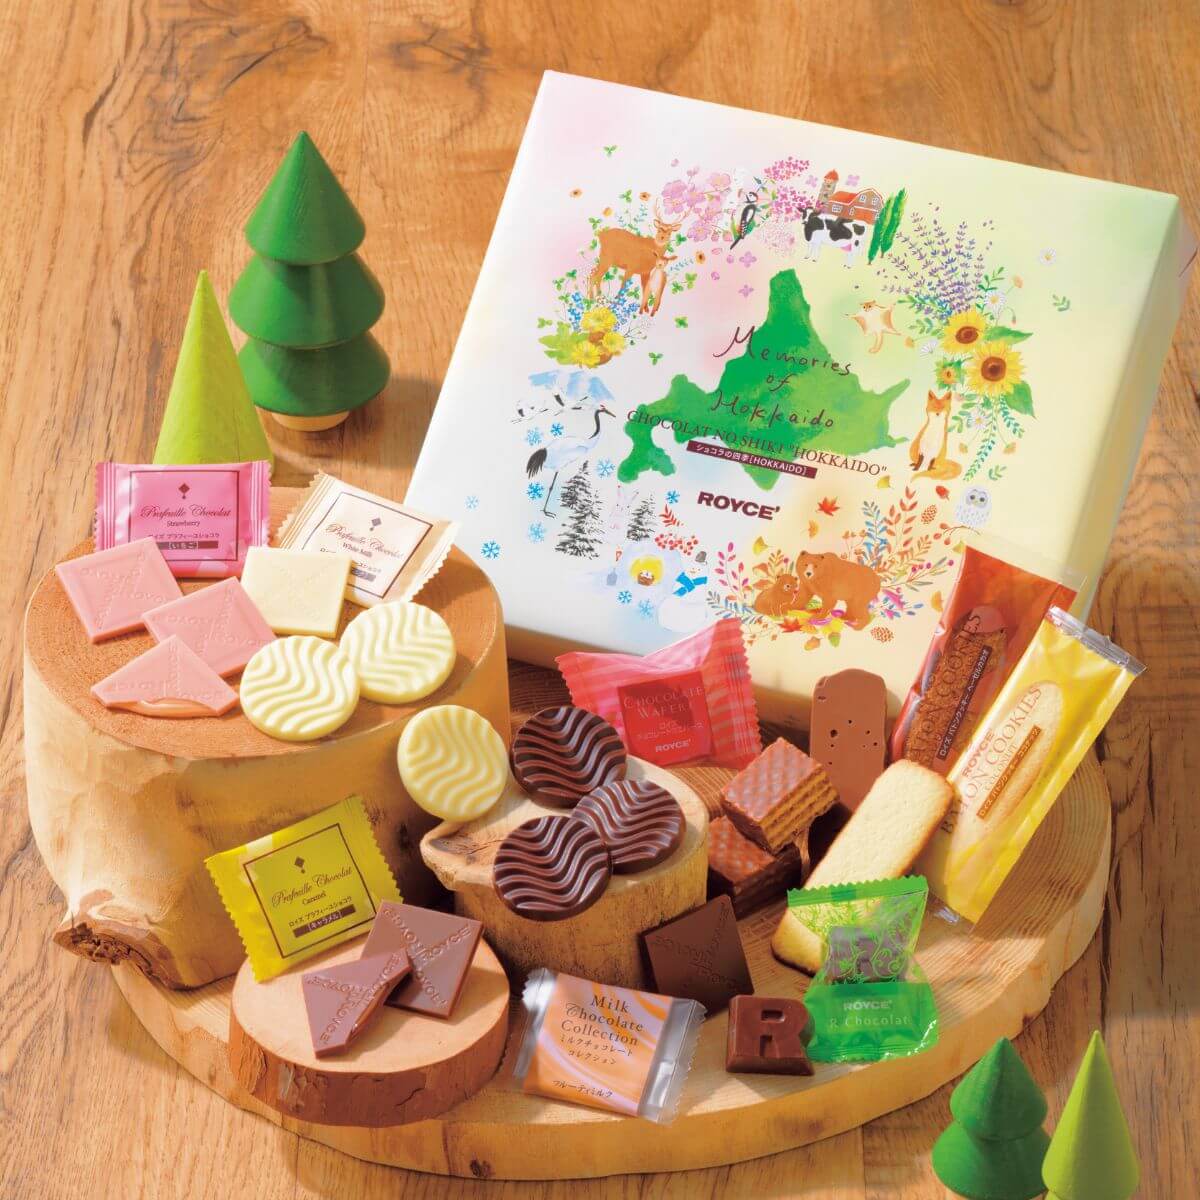 ROYCE' Chocolate - Chocolat No Shiki "Hokkaido" - Image shows wooden stands with confections in different shapes and colors. Accents include miniature green treesand a yellow printed box with text saying Memories of Hokkaido. Chocolat No Shiki "Hokkaido". ROYCE'. Background is in brown with wood texture effect.